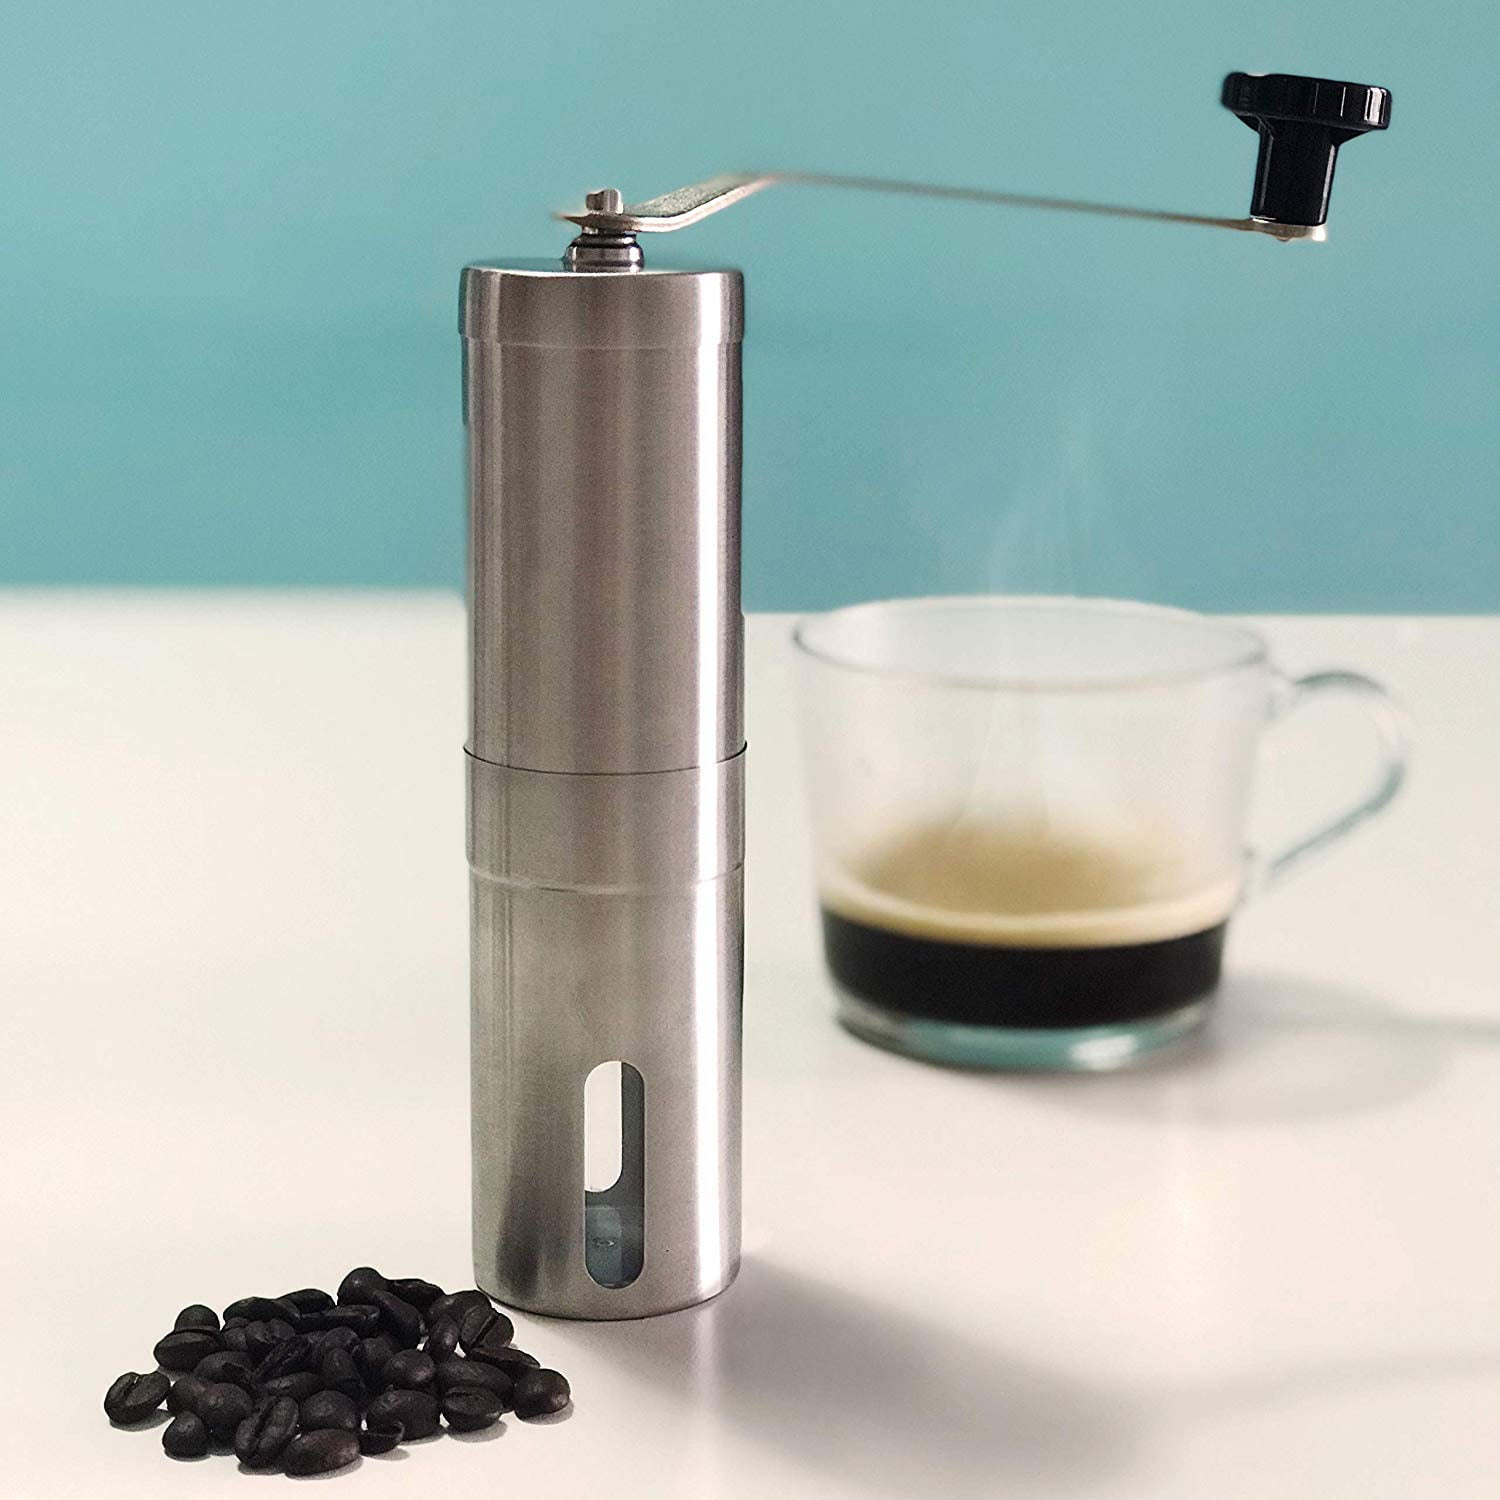 Stainless Steel Ceramic Burr Bean Mill Manual Coffee Grinder Portable Hand Crank